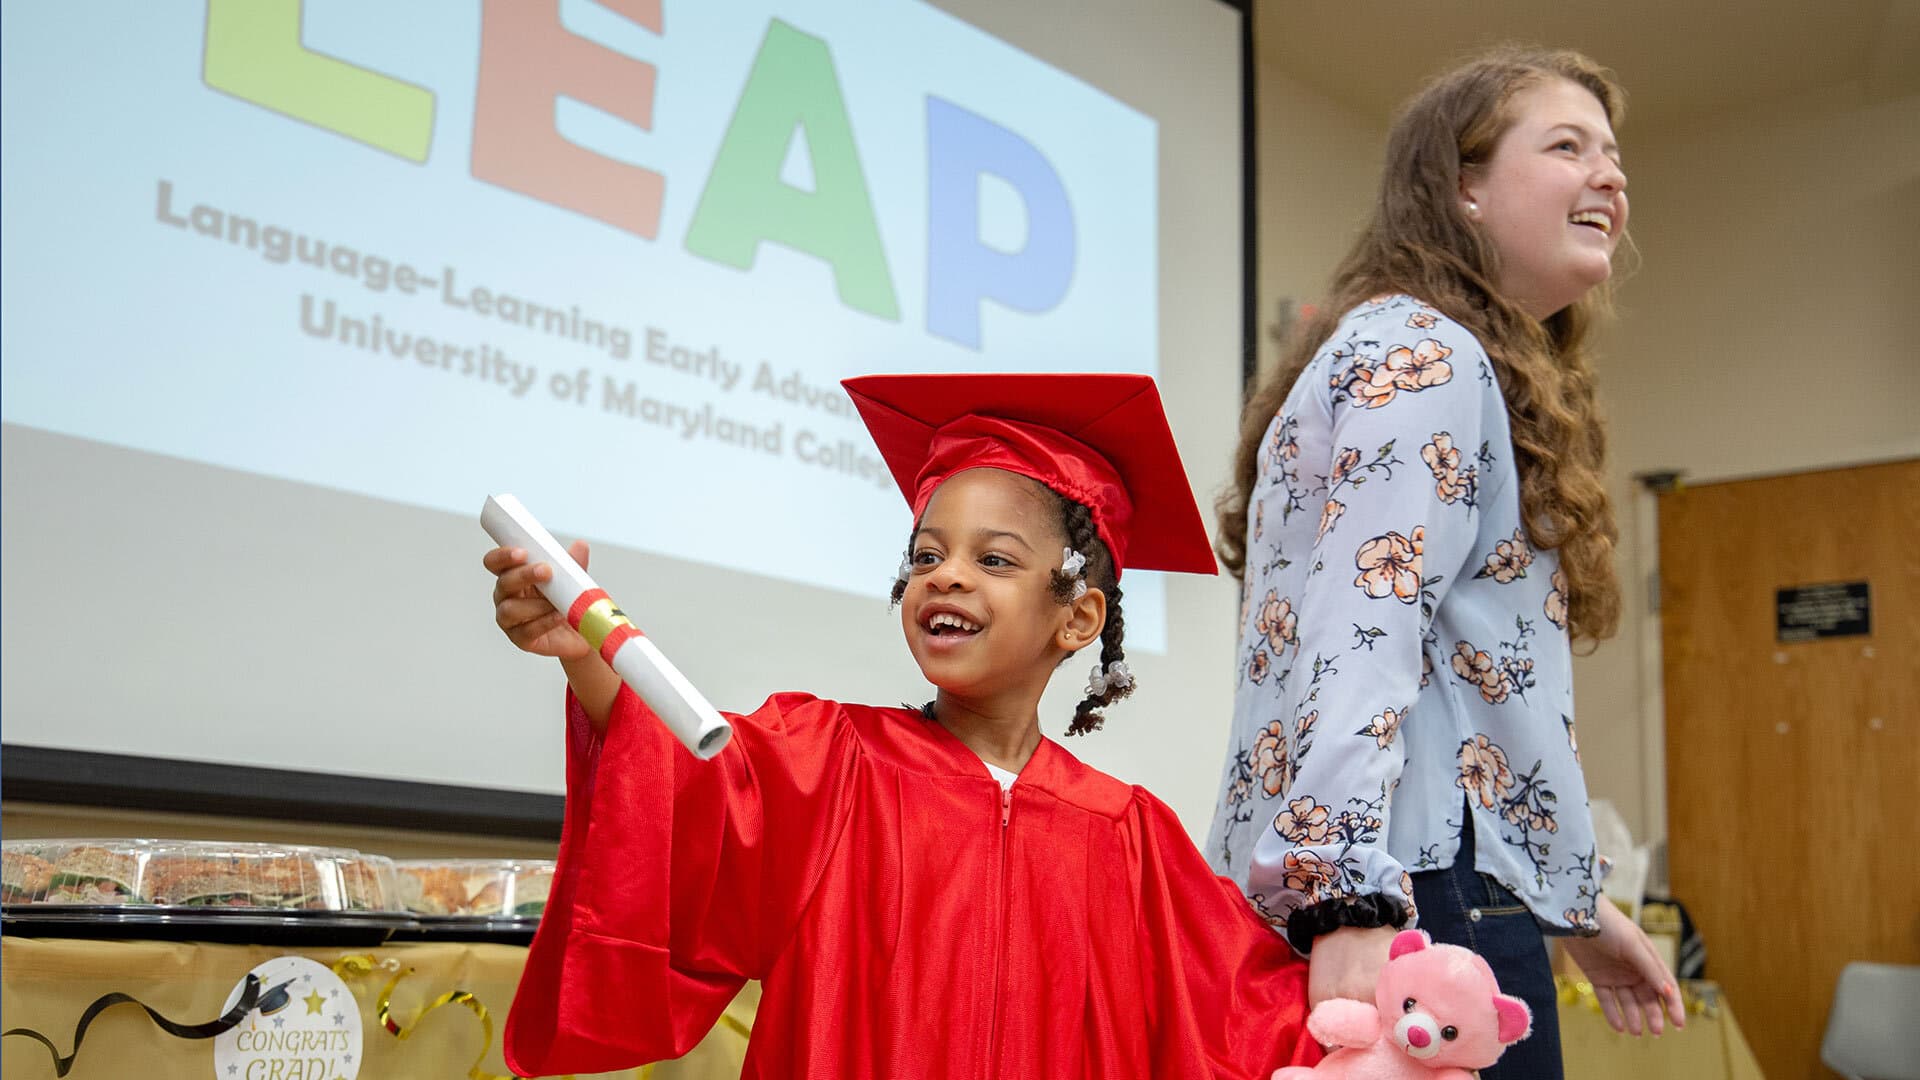 LEAP student receives diploma